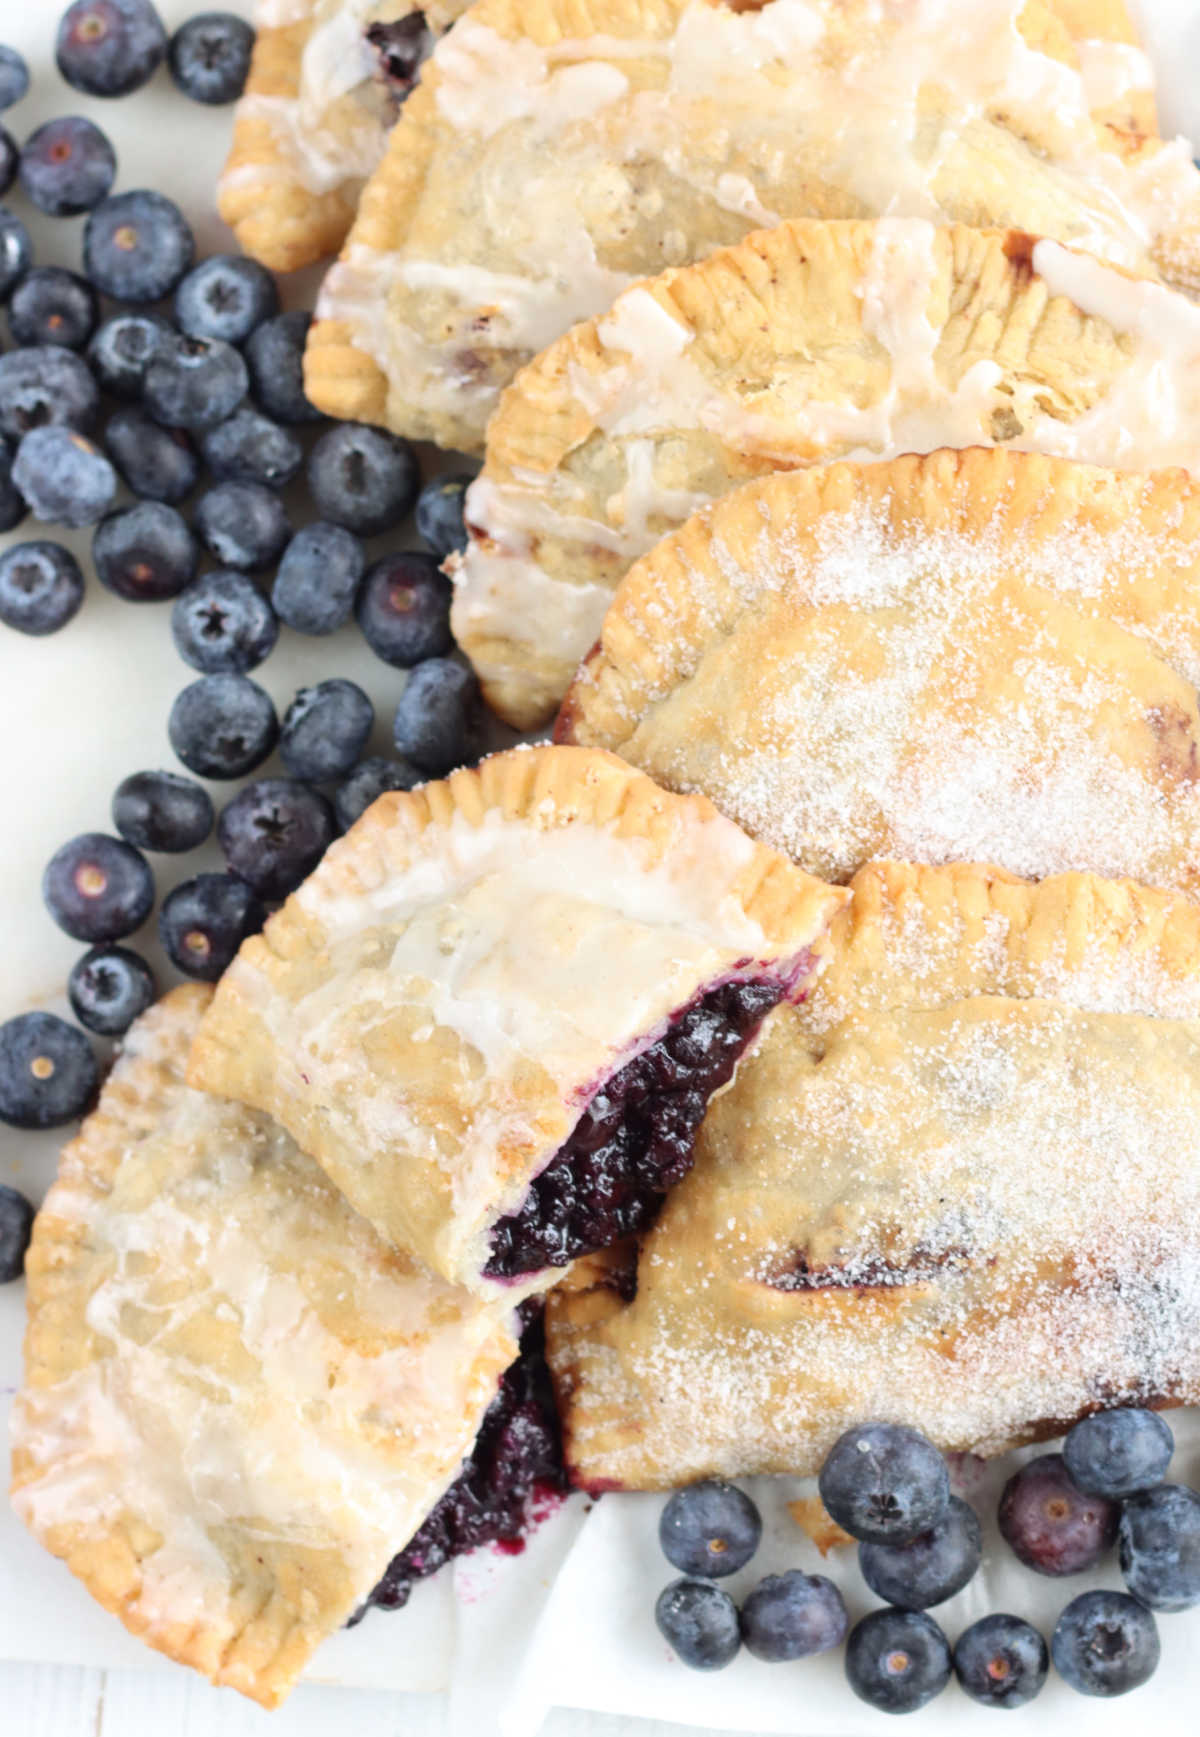 Hand pies on white marble, one cut in half with blueberry pie filling showing.